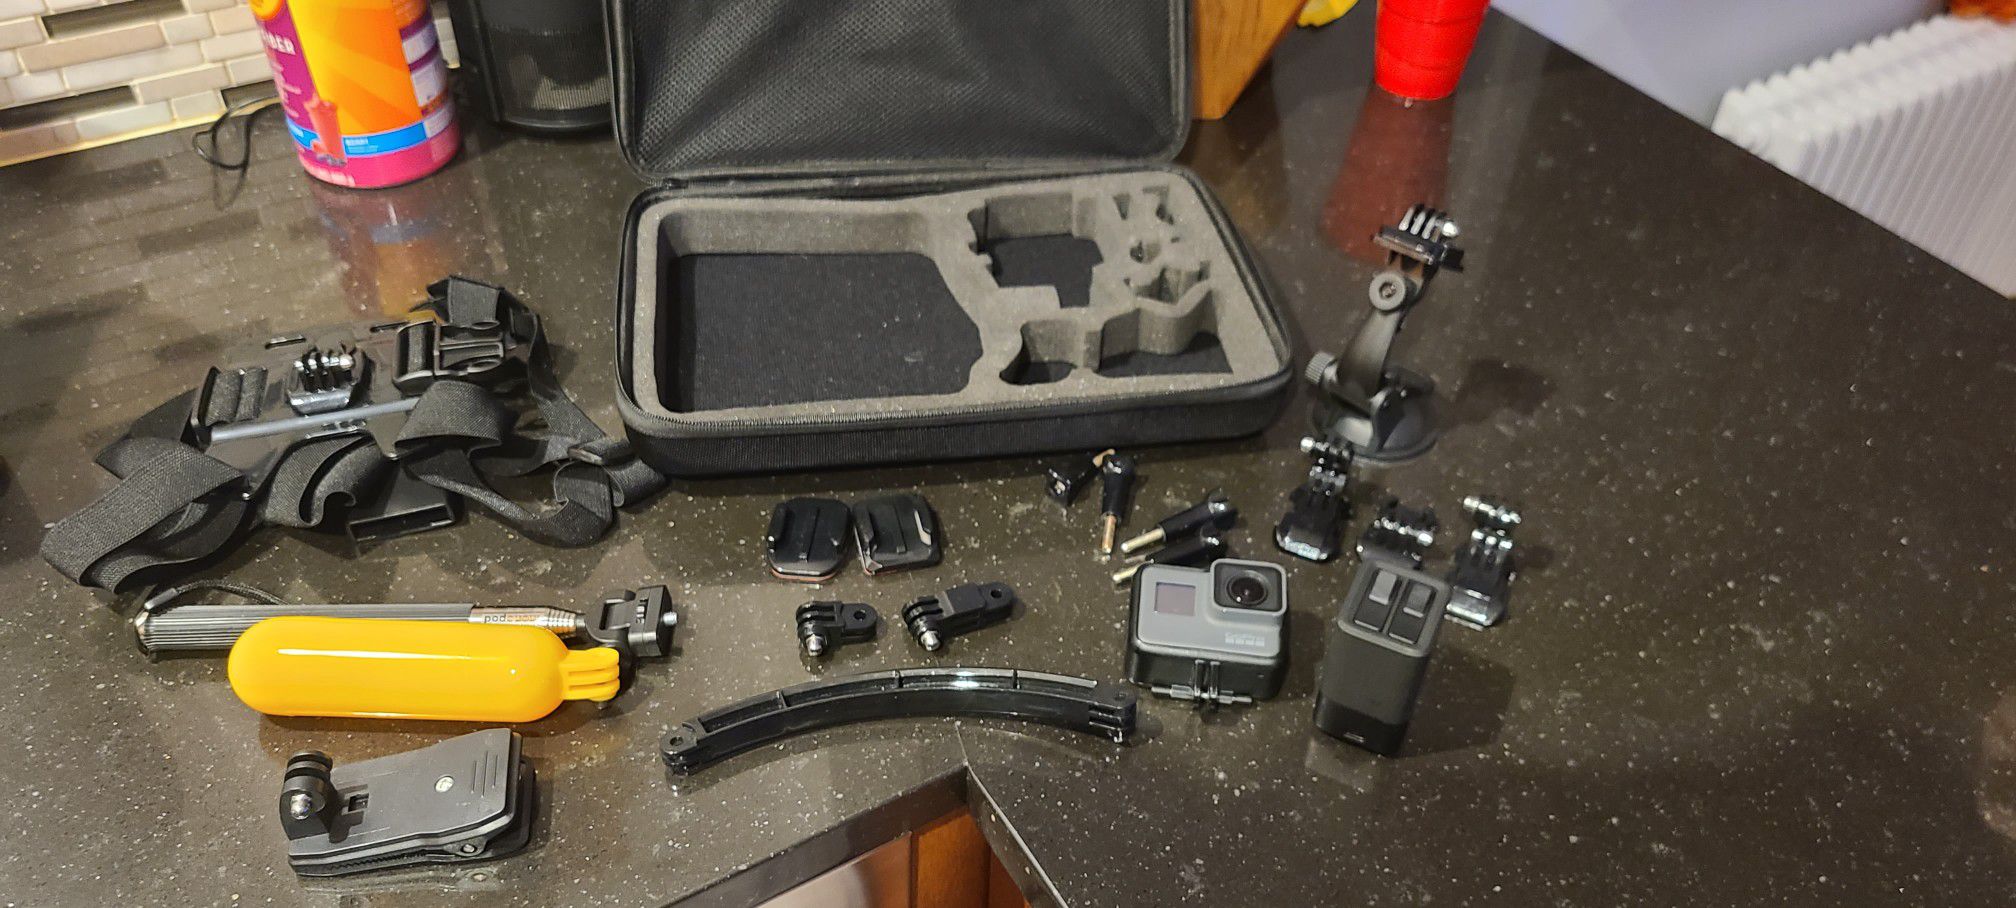 GoPro Hero 5 with a bunch of accessories